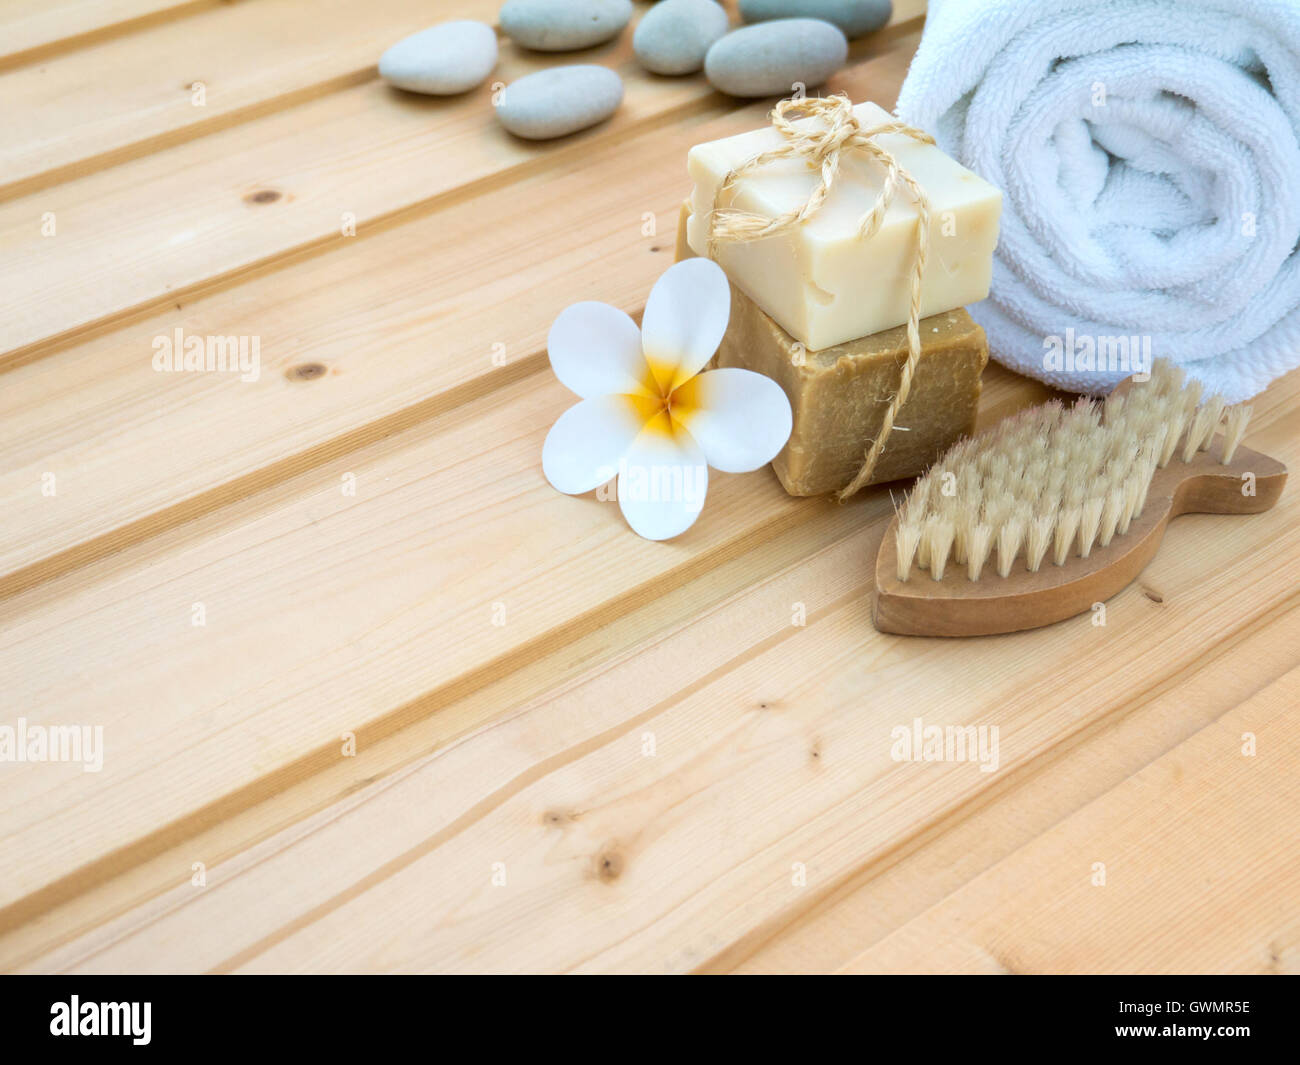 White rolled towel, tiare flower, soap tied with jute rope, stones and fish shaped nail brush on the wooden planks Stock Photo